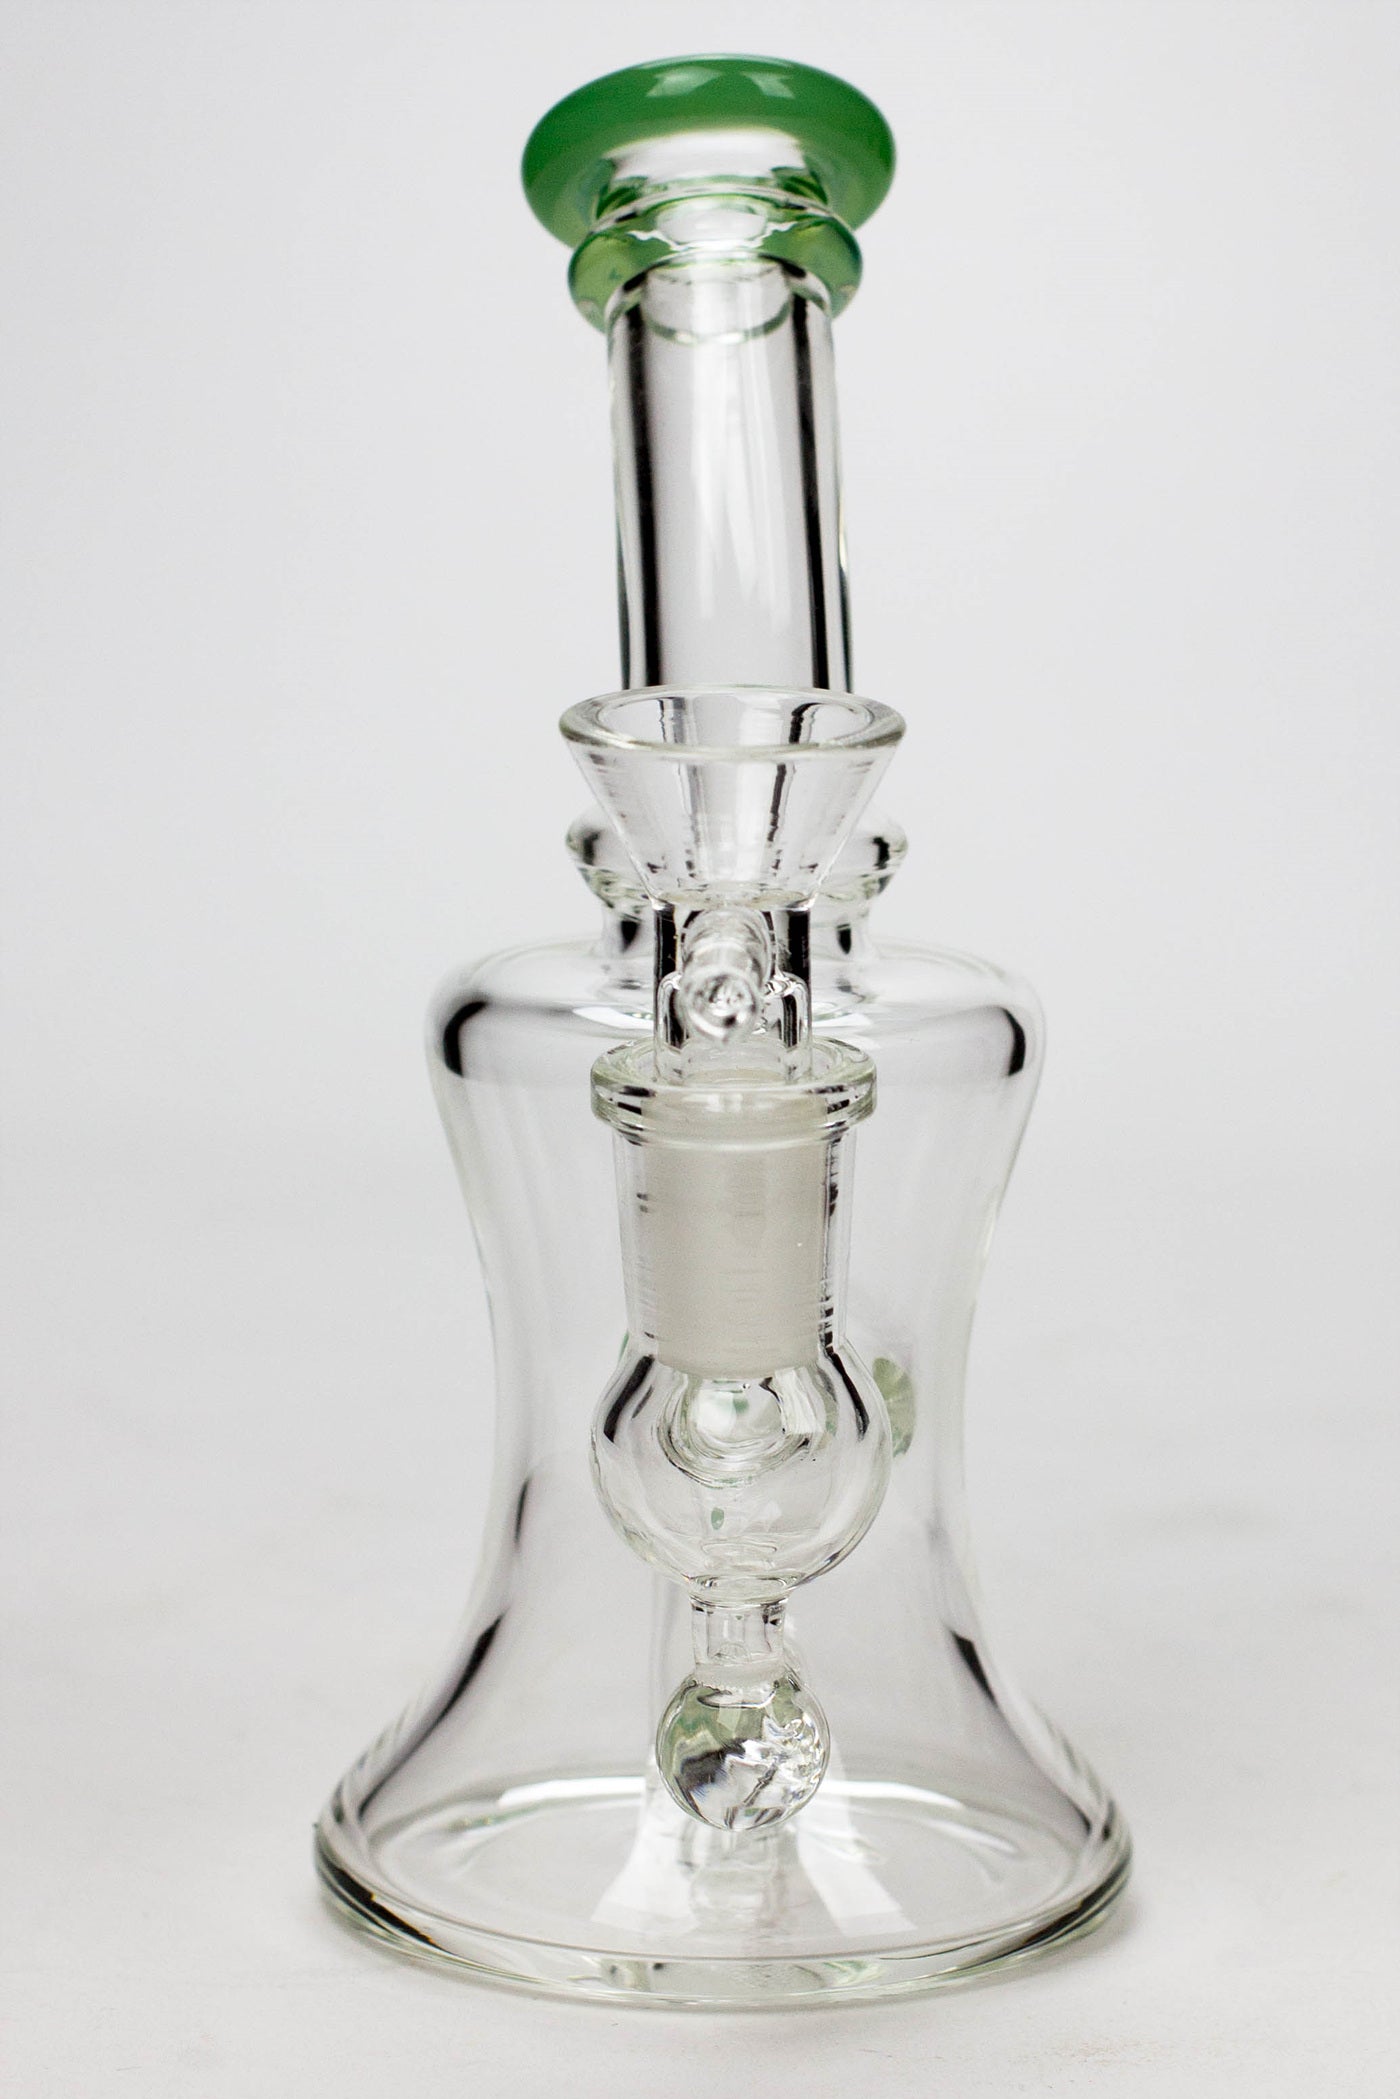 6" 2-in-1 fixed 3 hole diffuser Skirt bubbler_1